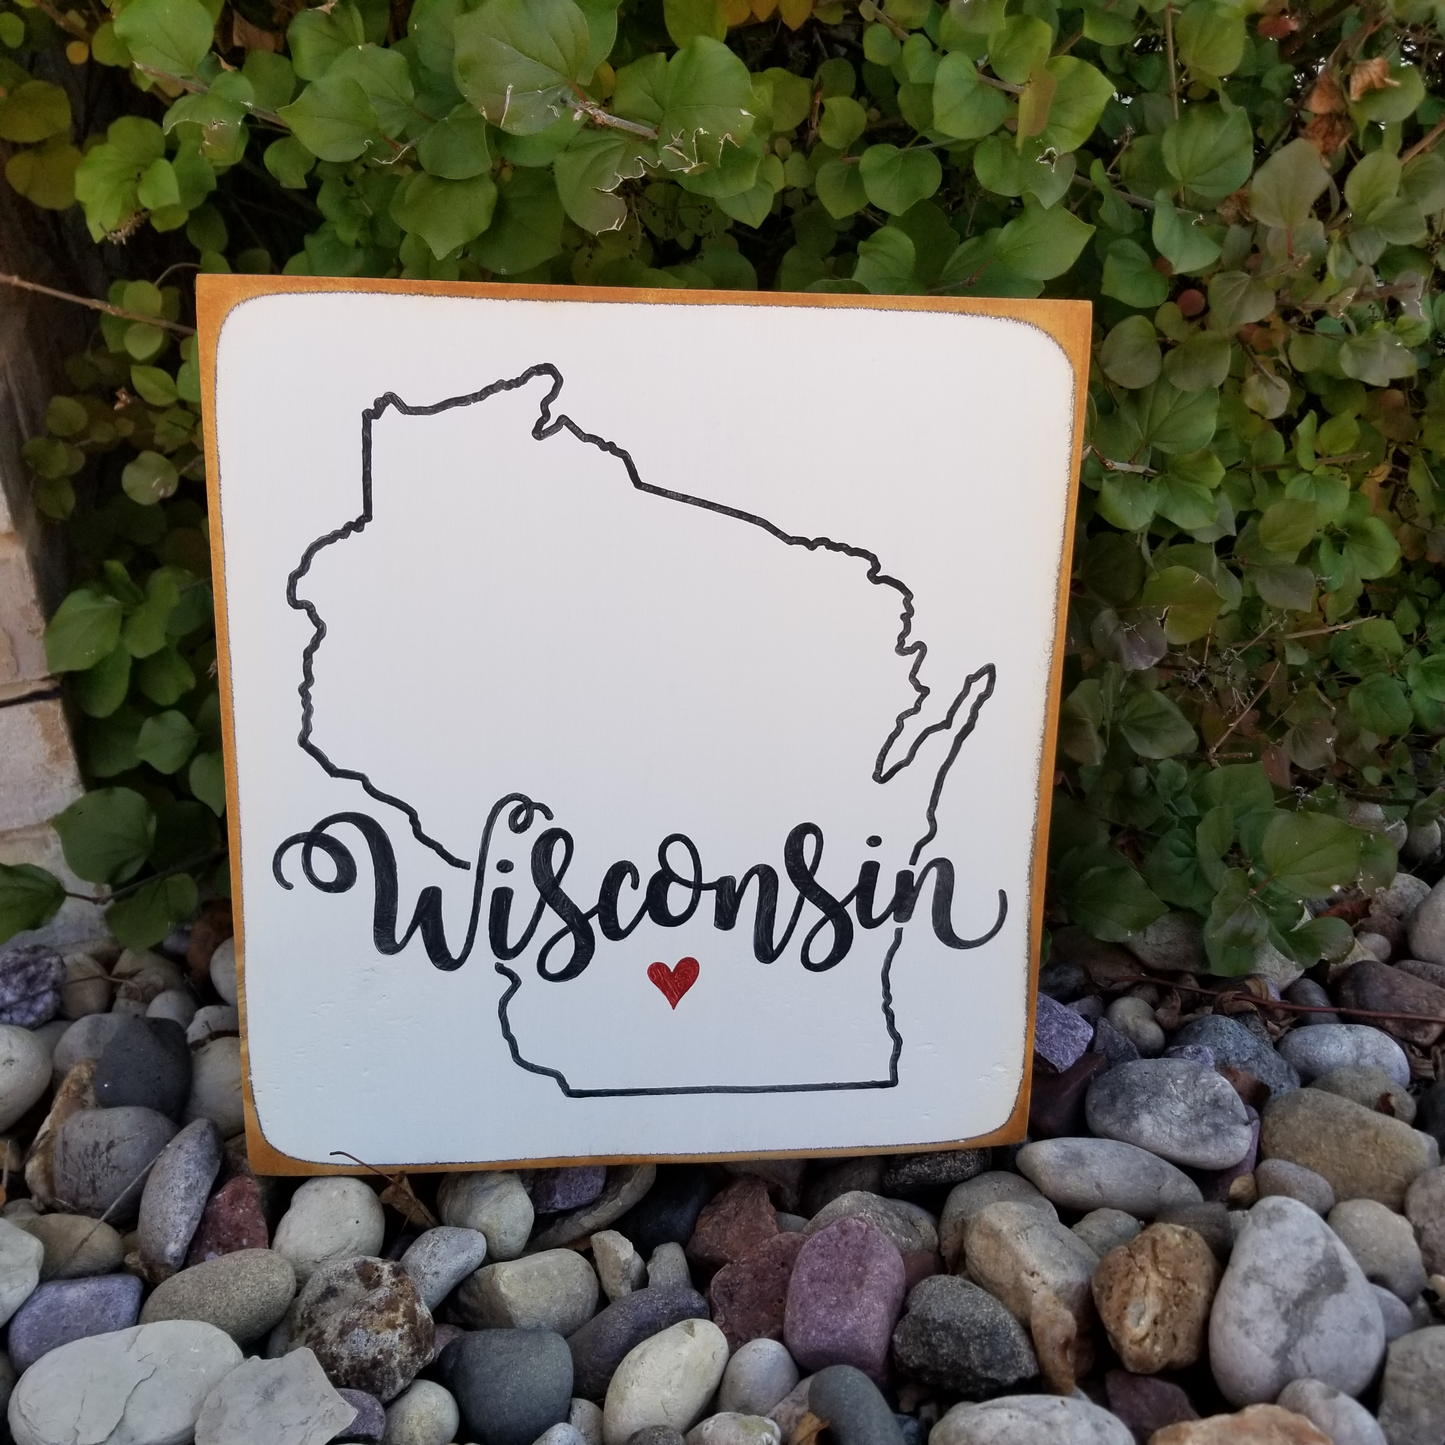 Wisconsin Wood sign